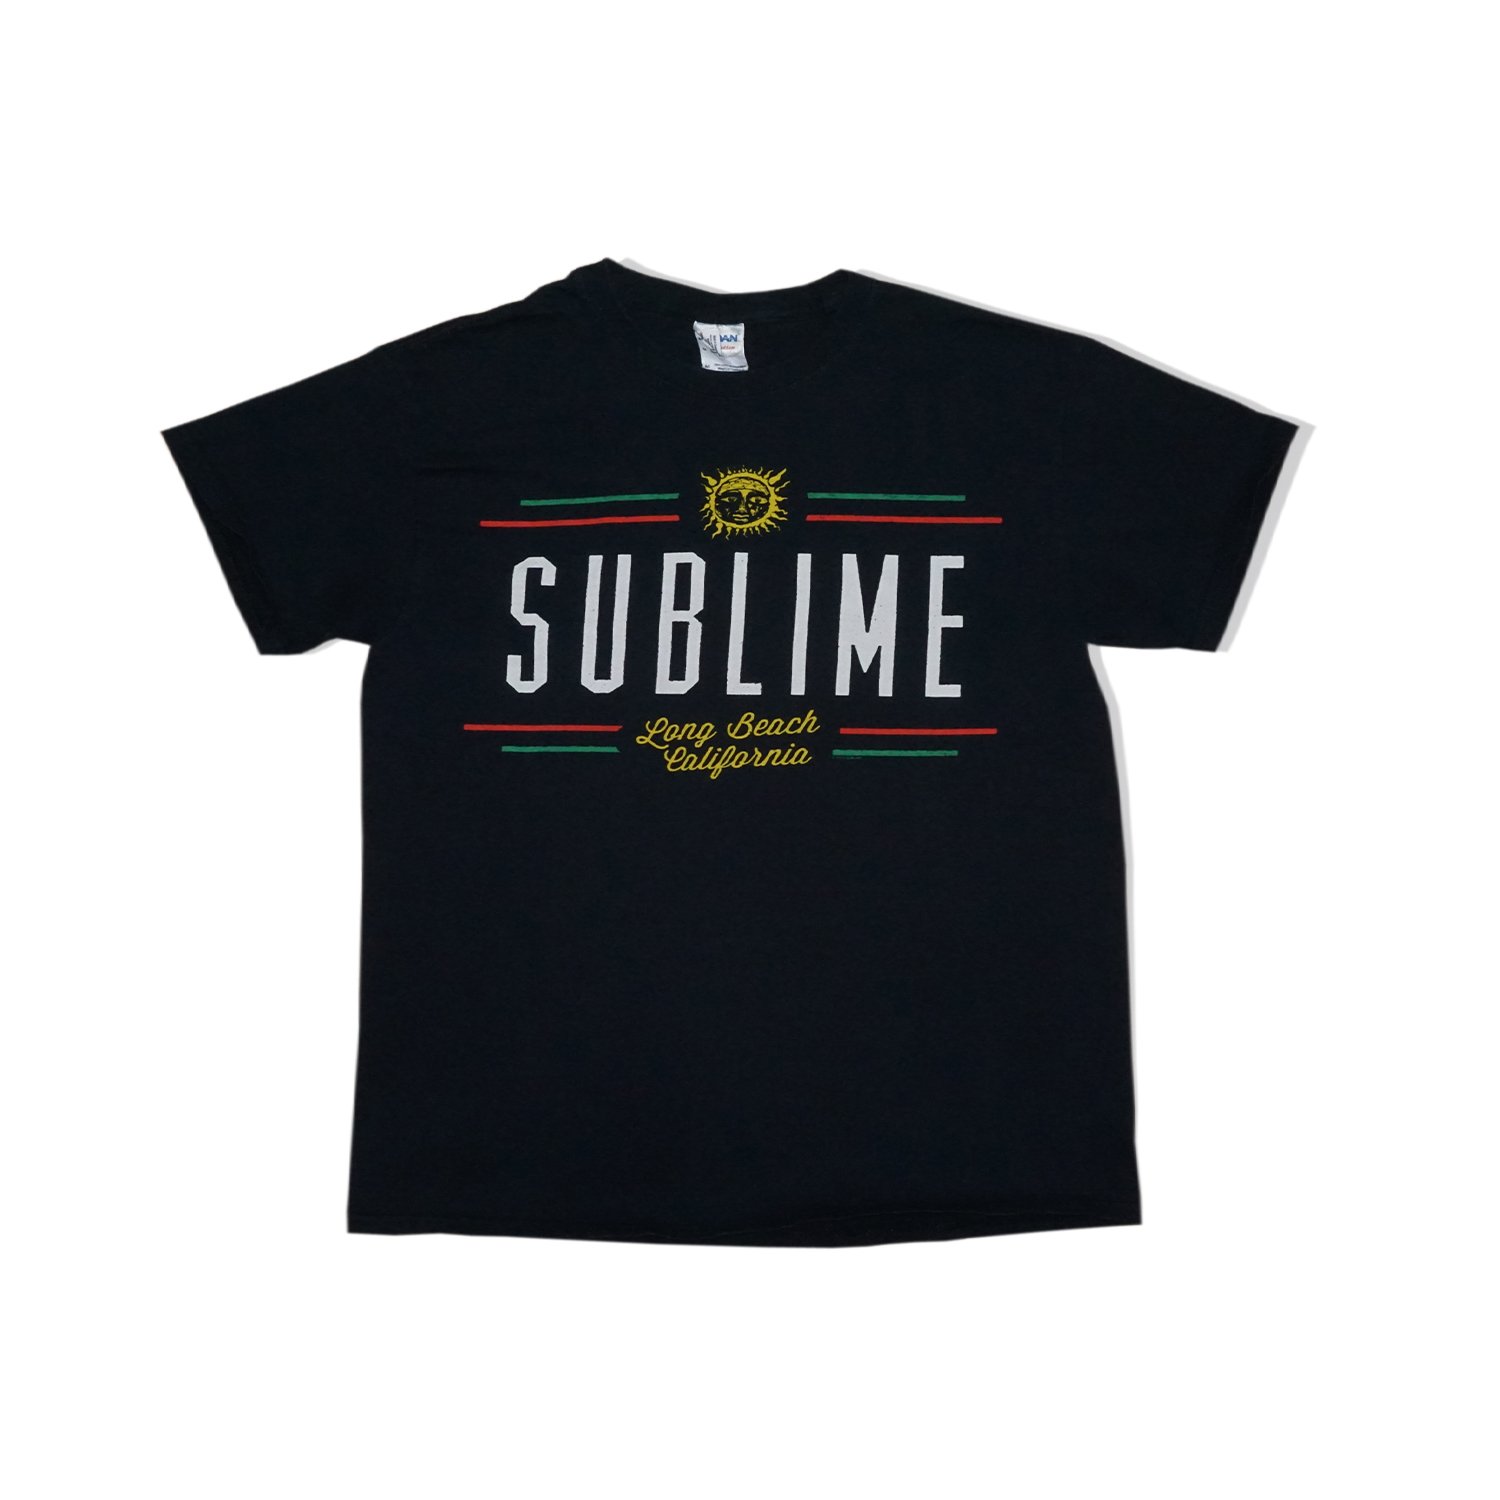 Retro Sublime Woman's Band T-Shirt (Sam Russo Collection)